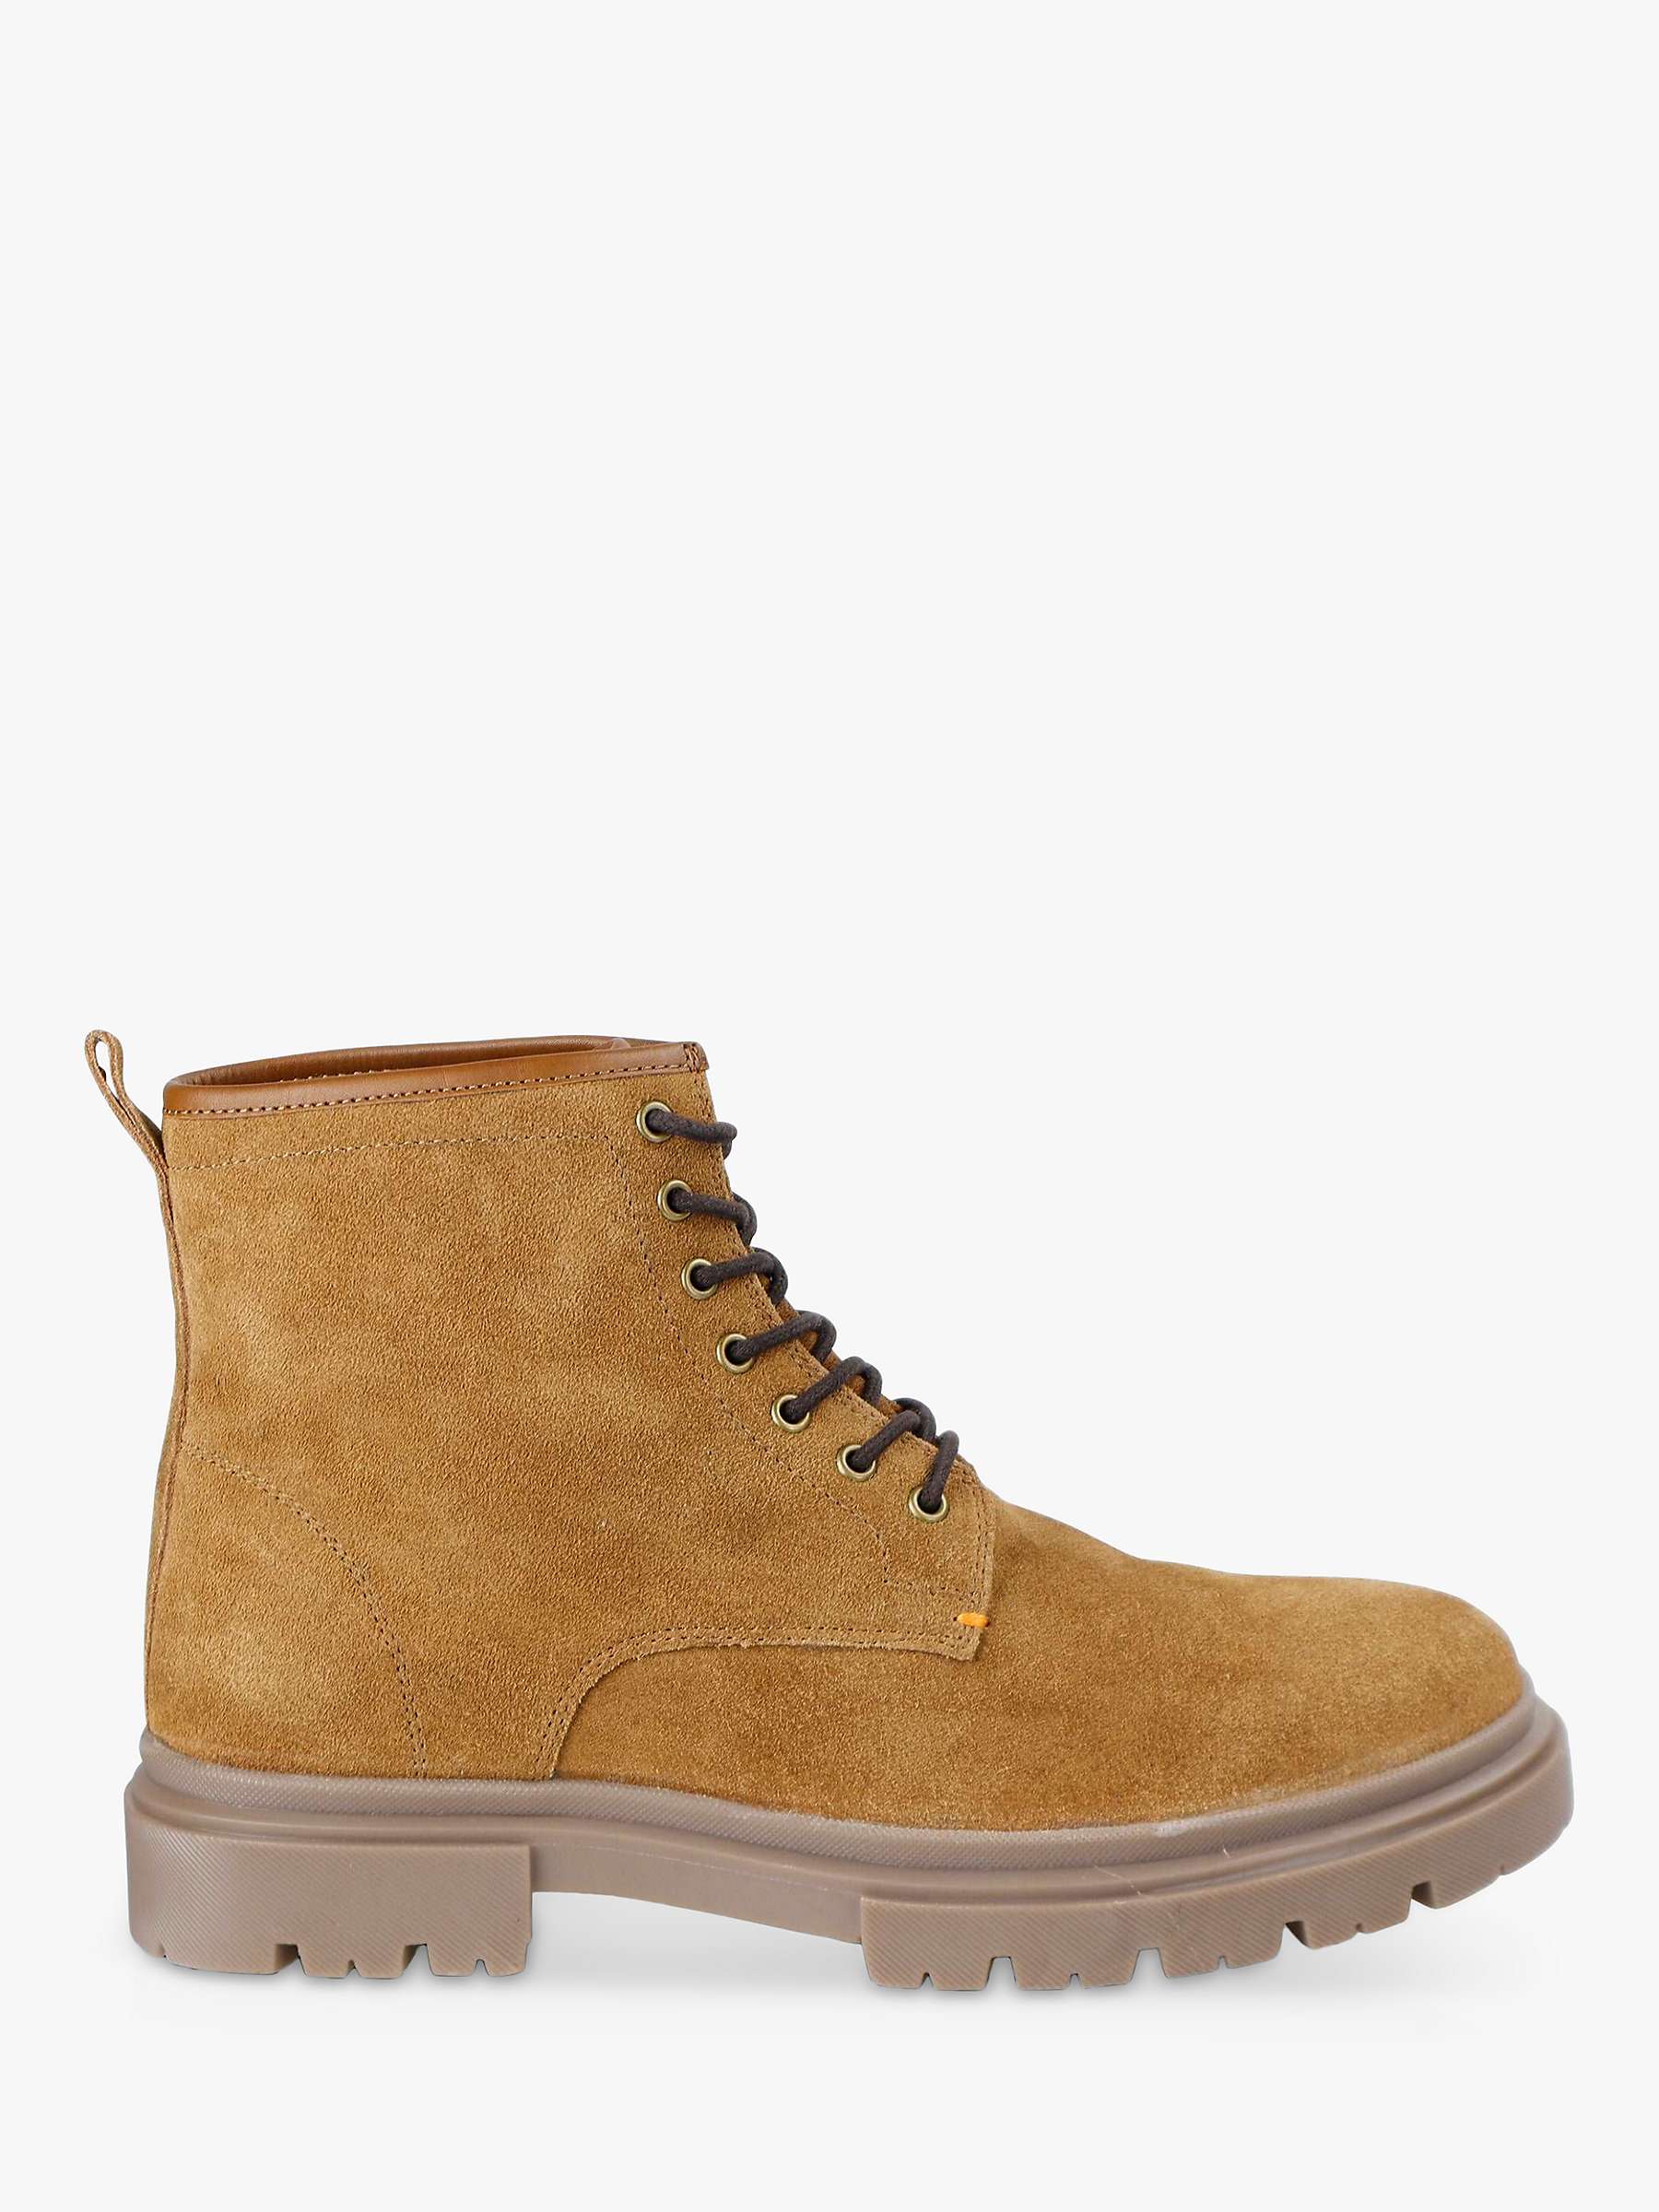 Buy Silver Street London Greenwich Suede Lace Up Ankle Boots, Tan Online at johnlewis.com